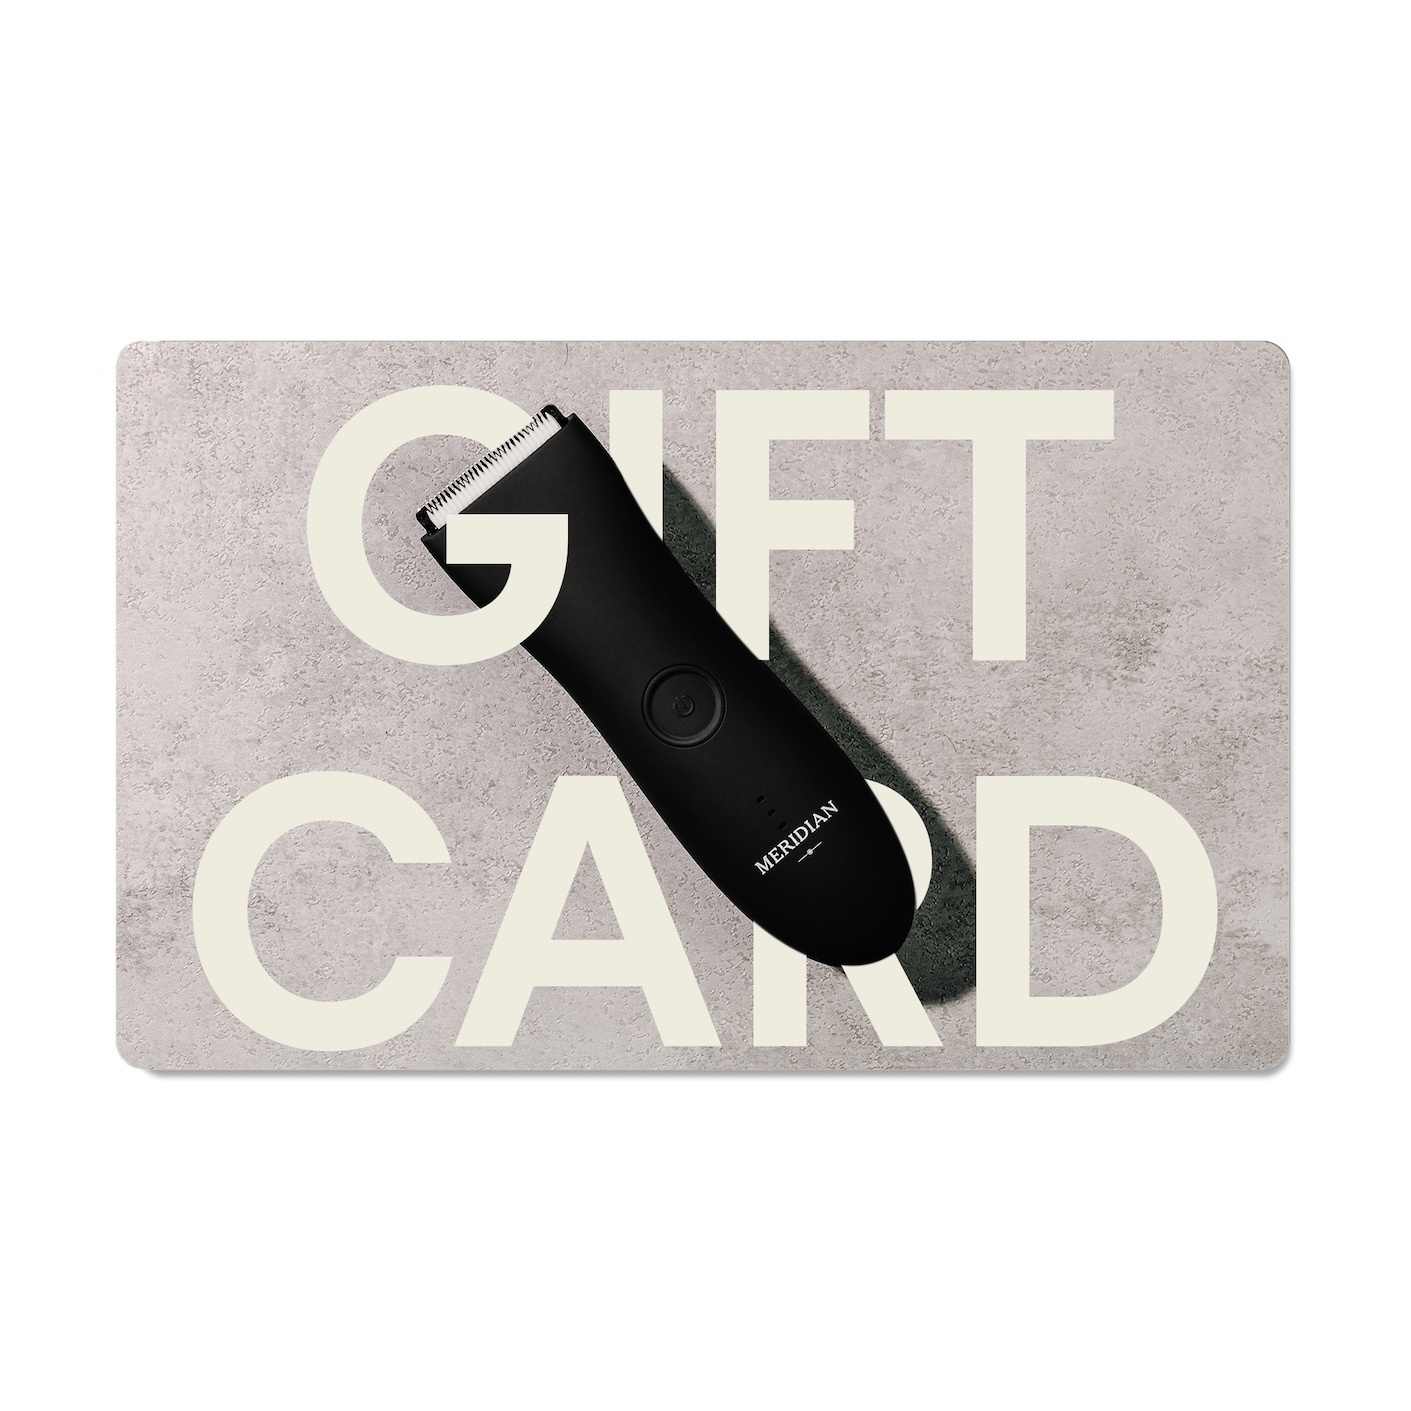 Play Cupid for the day with a Meridian Grooming eGift card for Men this Valentine